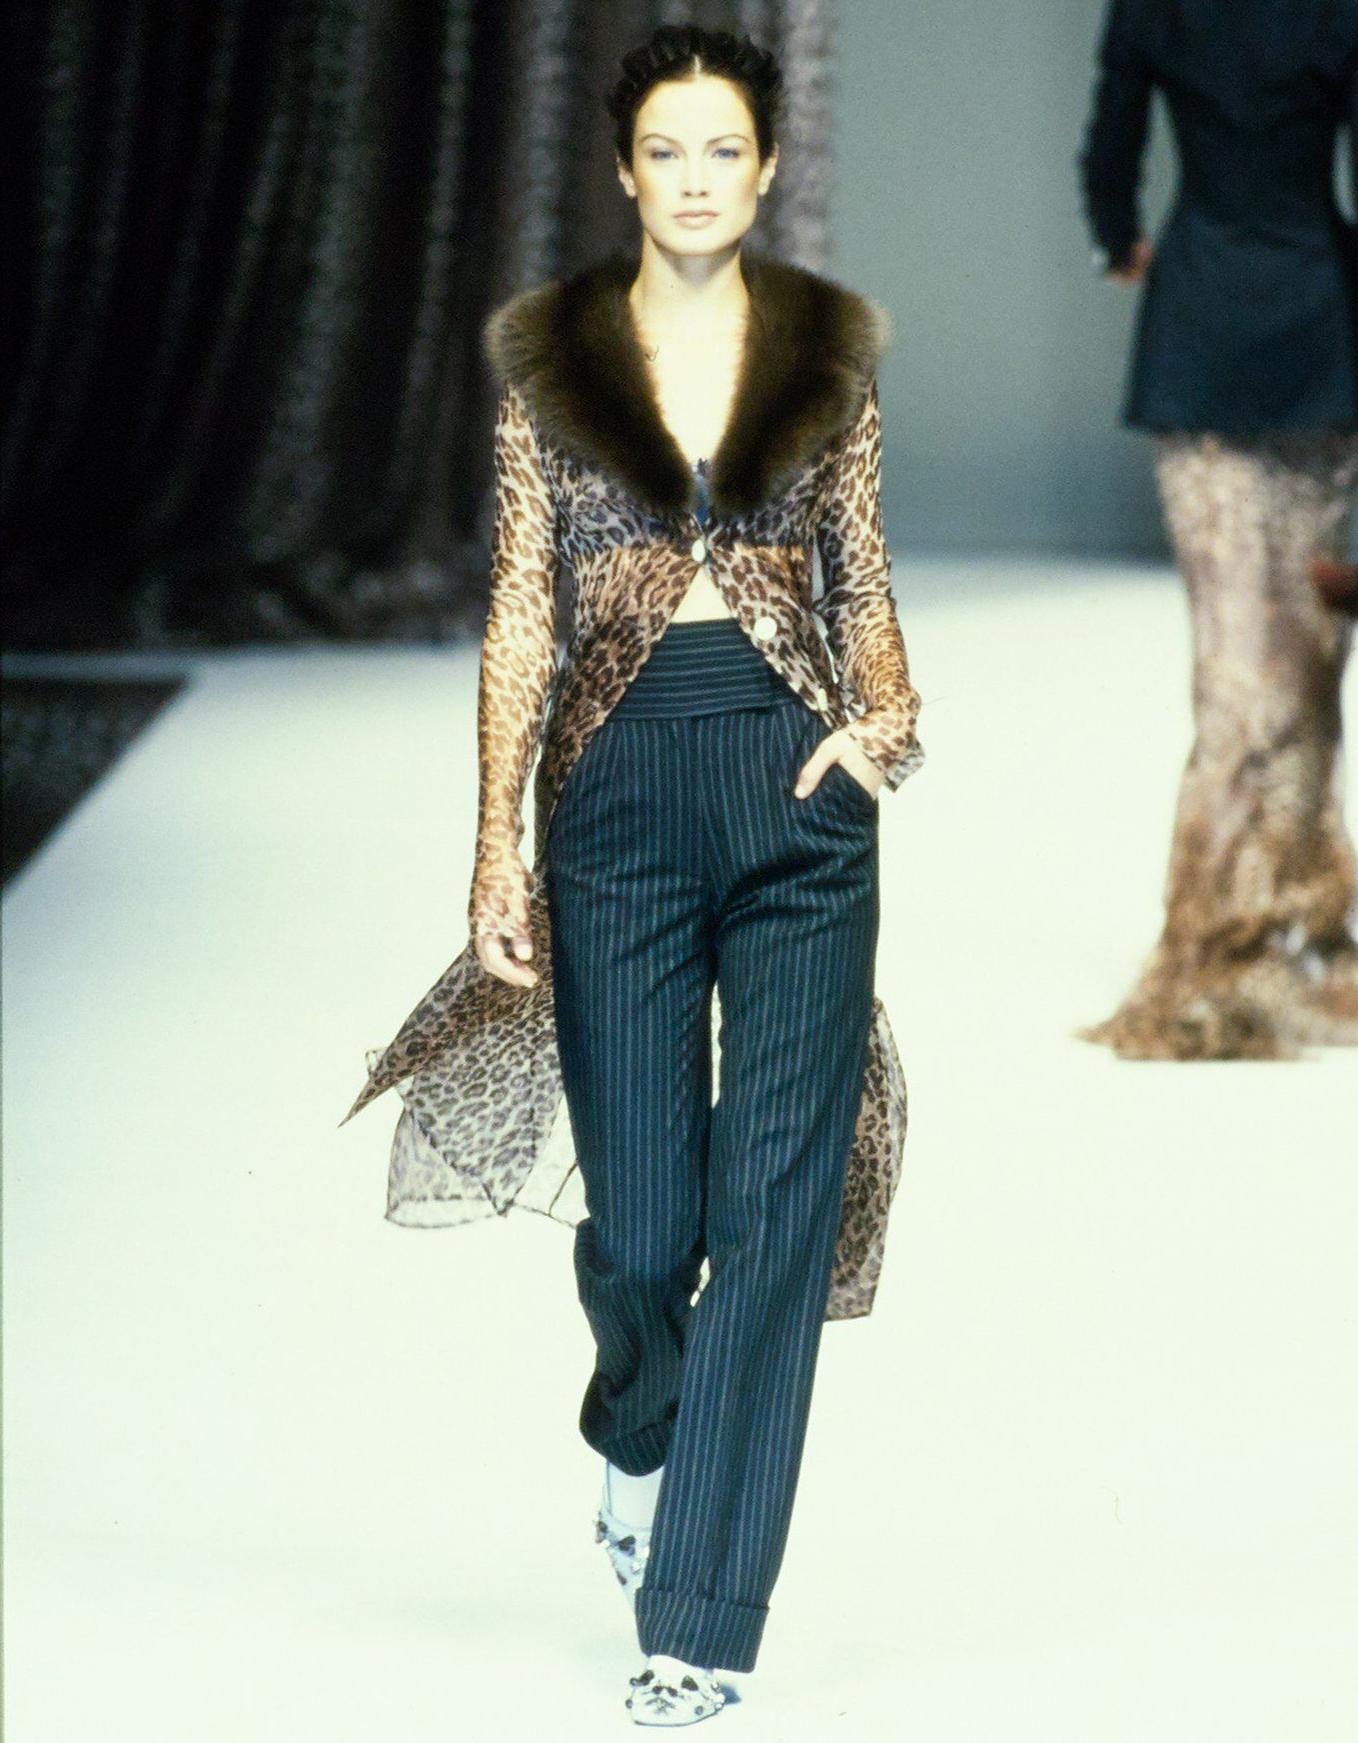 Dolce & Gabbana brown leopard print evening coat with mink fur collar and large logo engraved buttons.

Spring-Summer 1997